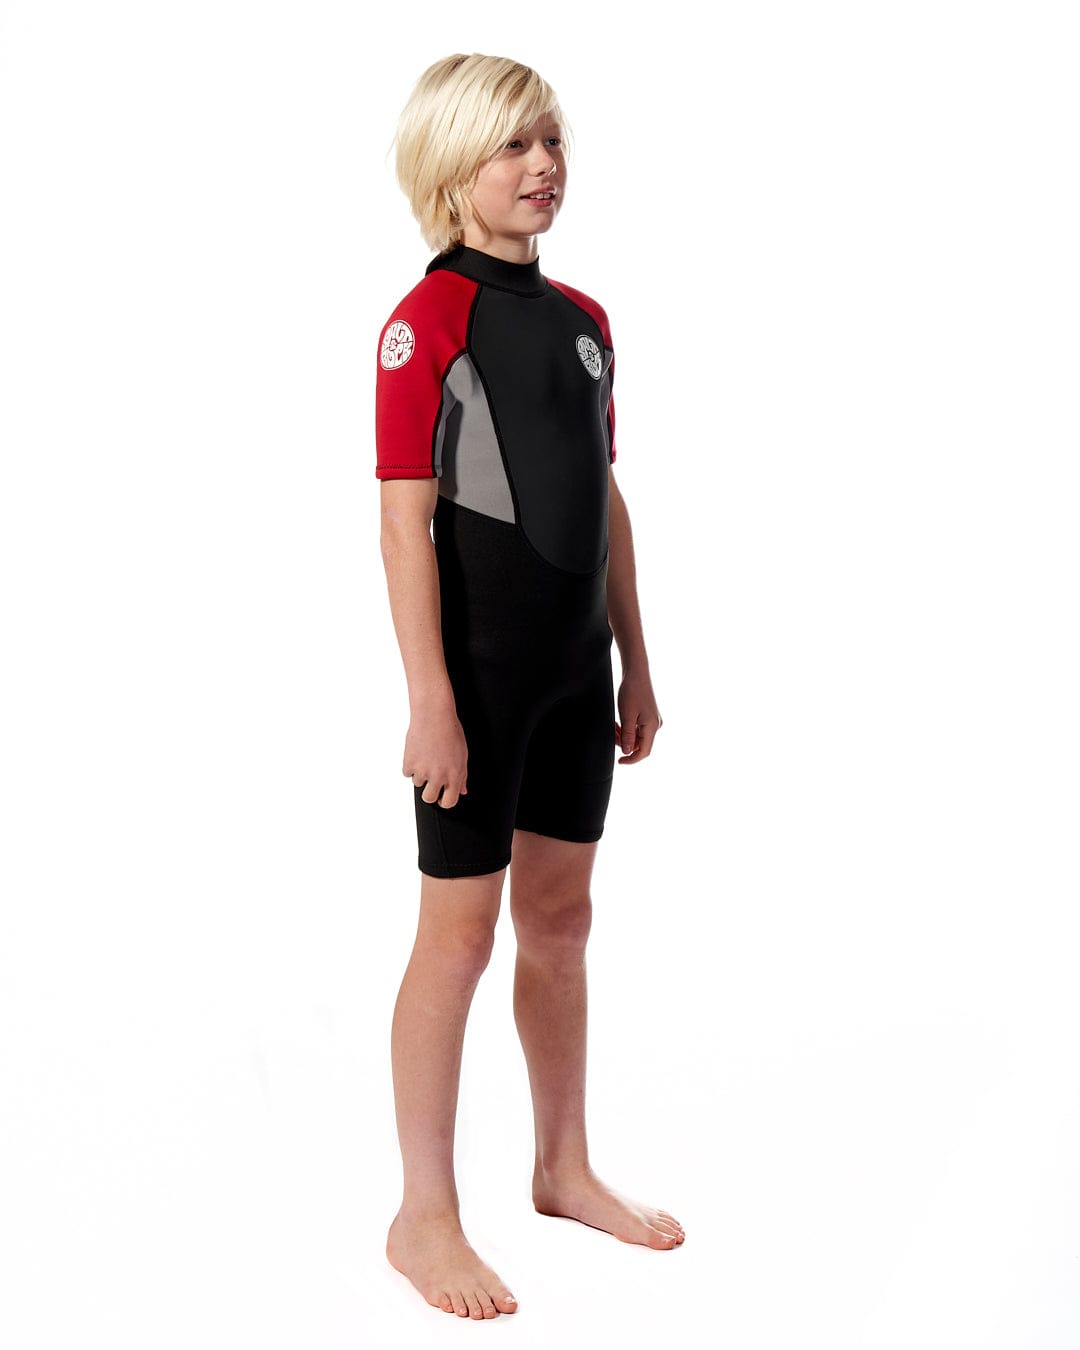 A young boy stands in a Saltrock Core - Boys 3/2 Shortie Wetsuit in black and red against a white background, looking to his left with a slight smile.